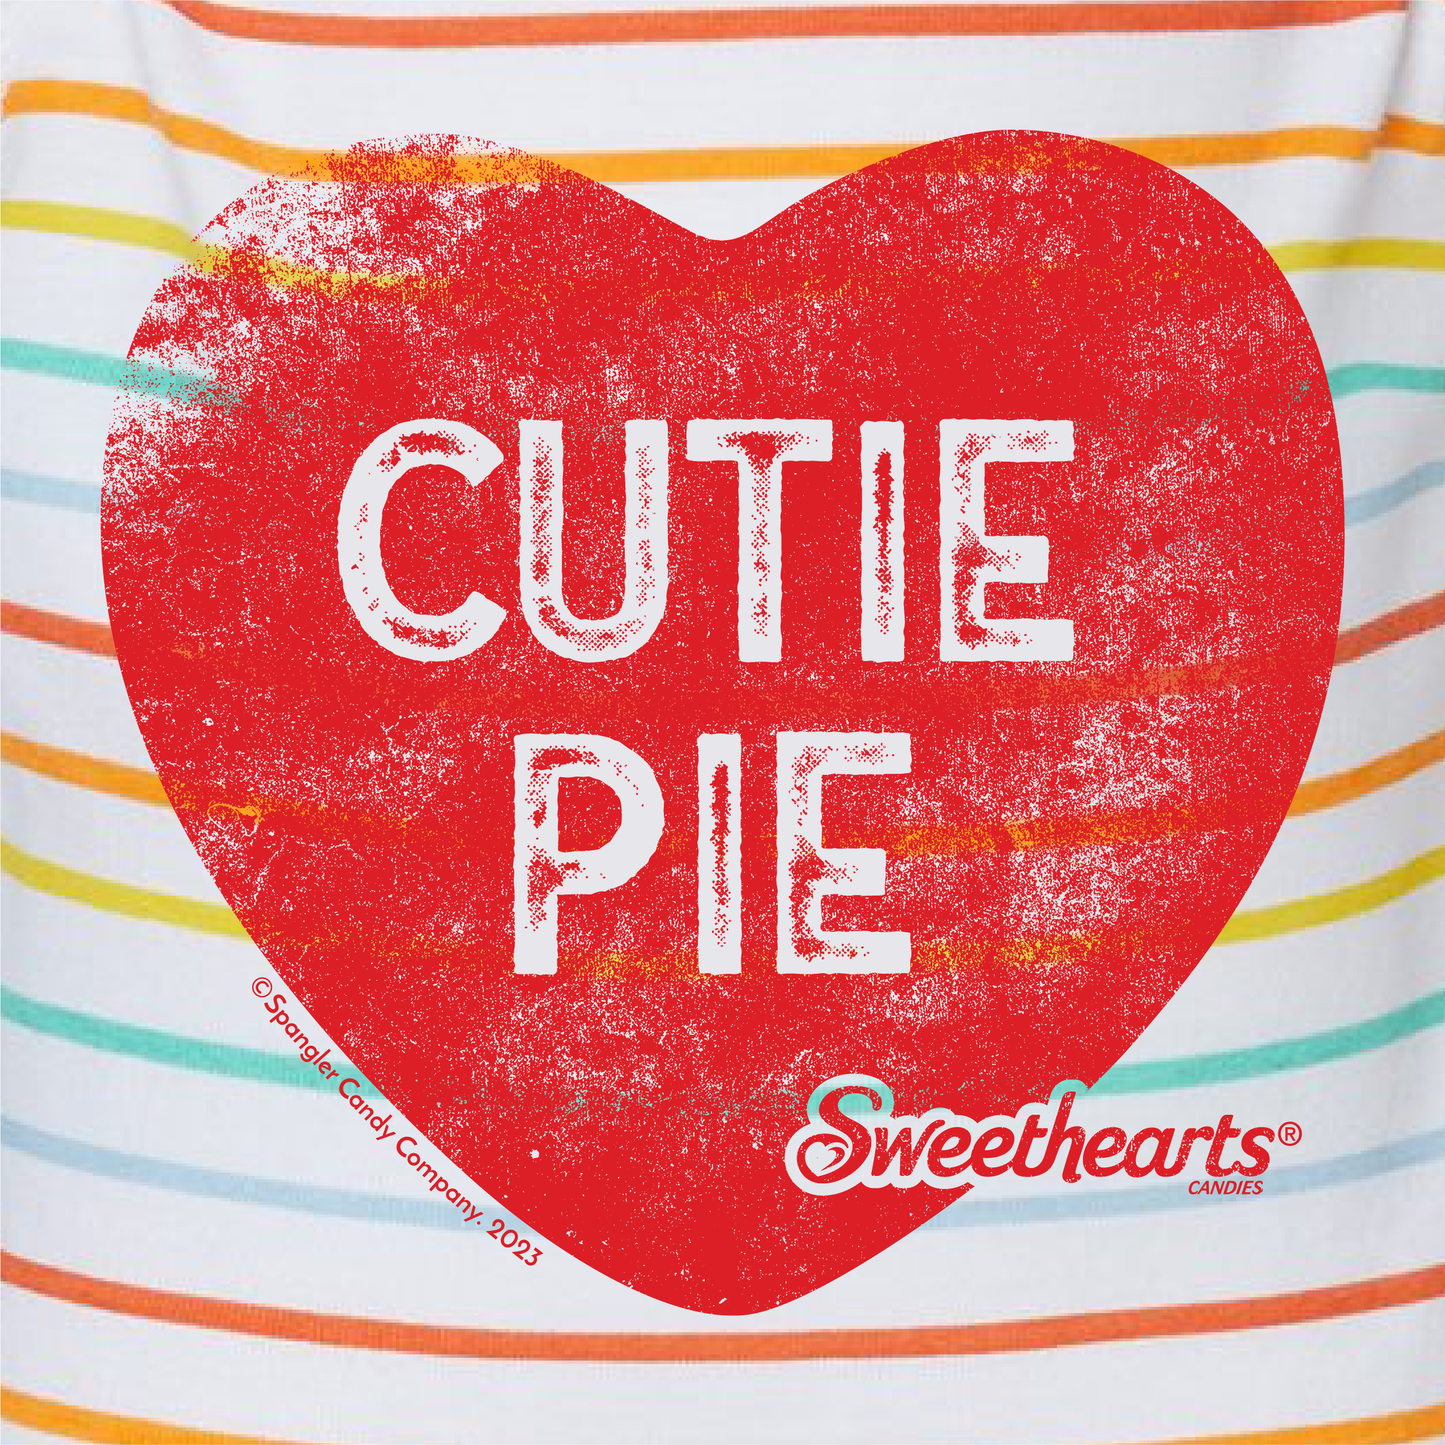 Toddler Cutie Pie Sweethearts® Striped Tee